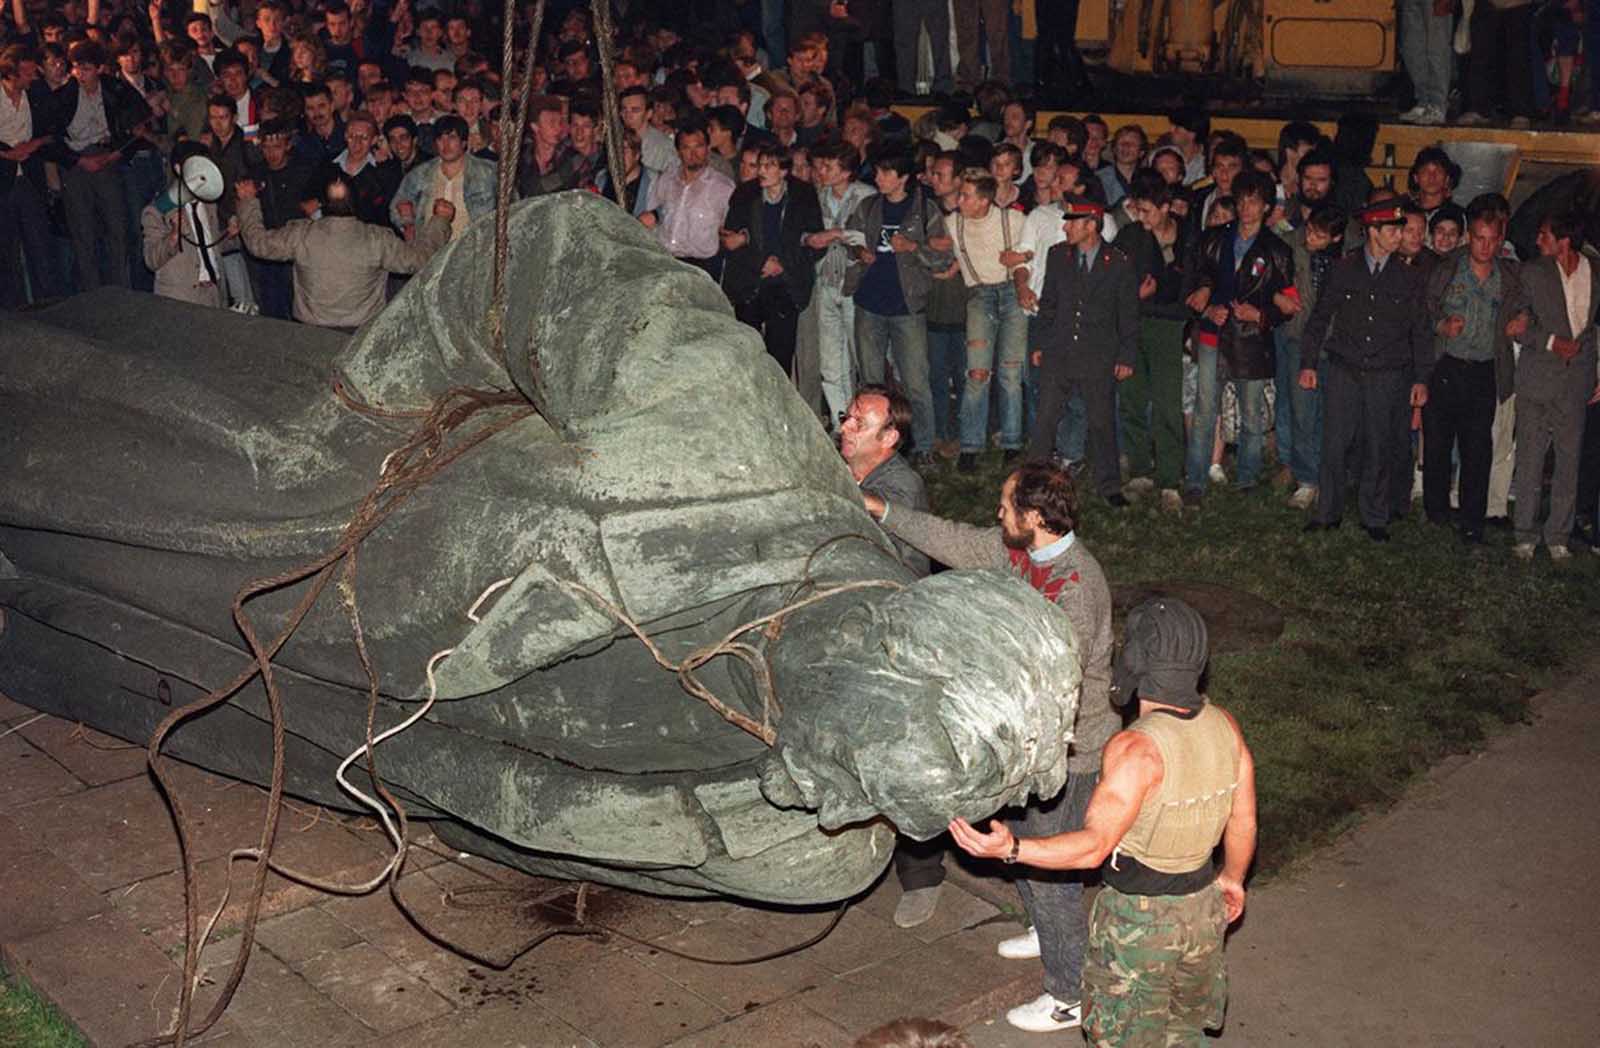 A crowd watches the statue of KGB founder Dzerzhinsky being toppled in Lubyanskaya Square in Moscow, on August 22, 1991.